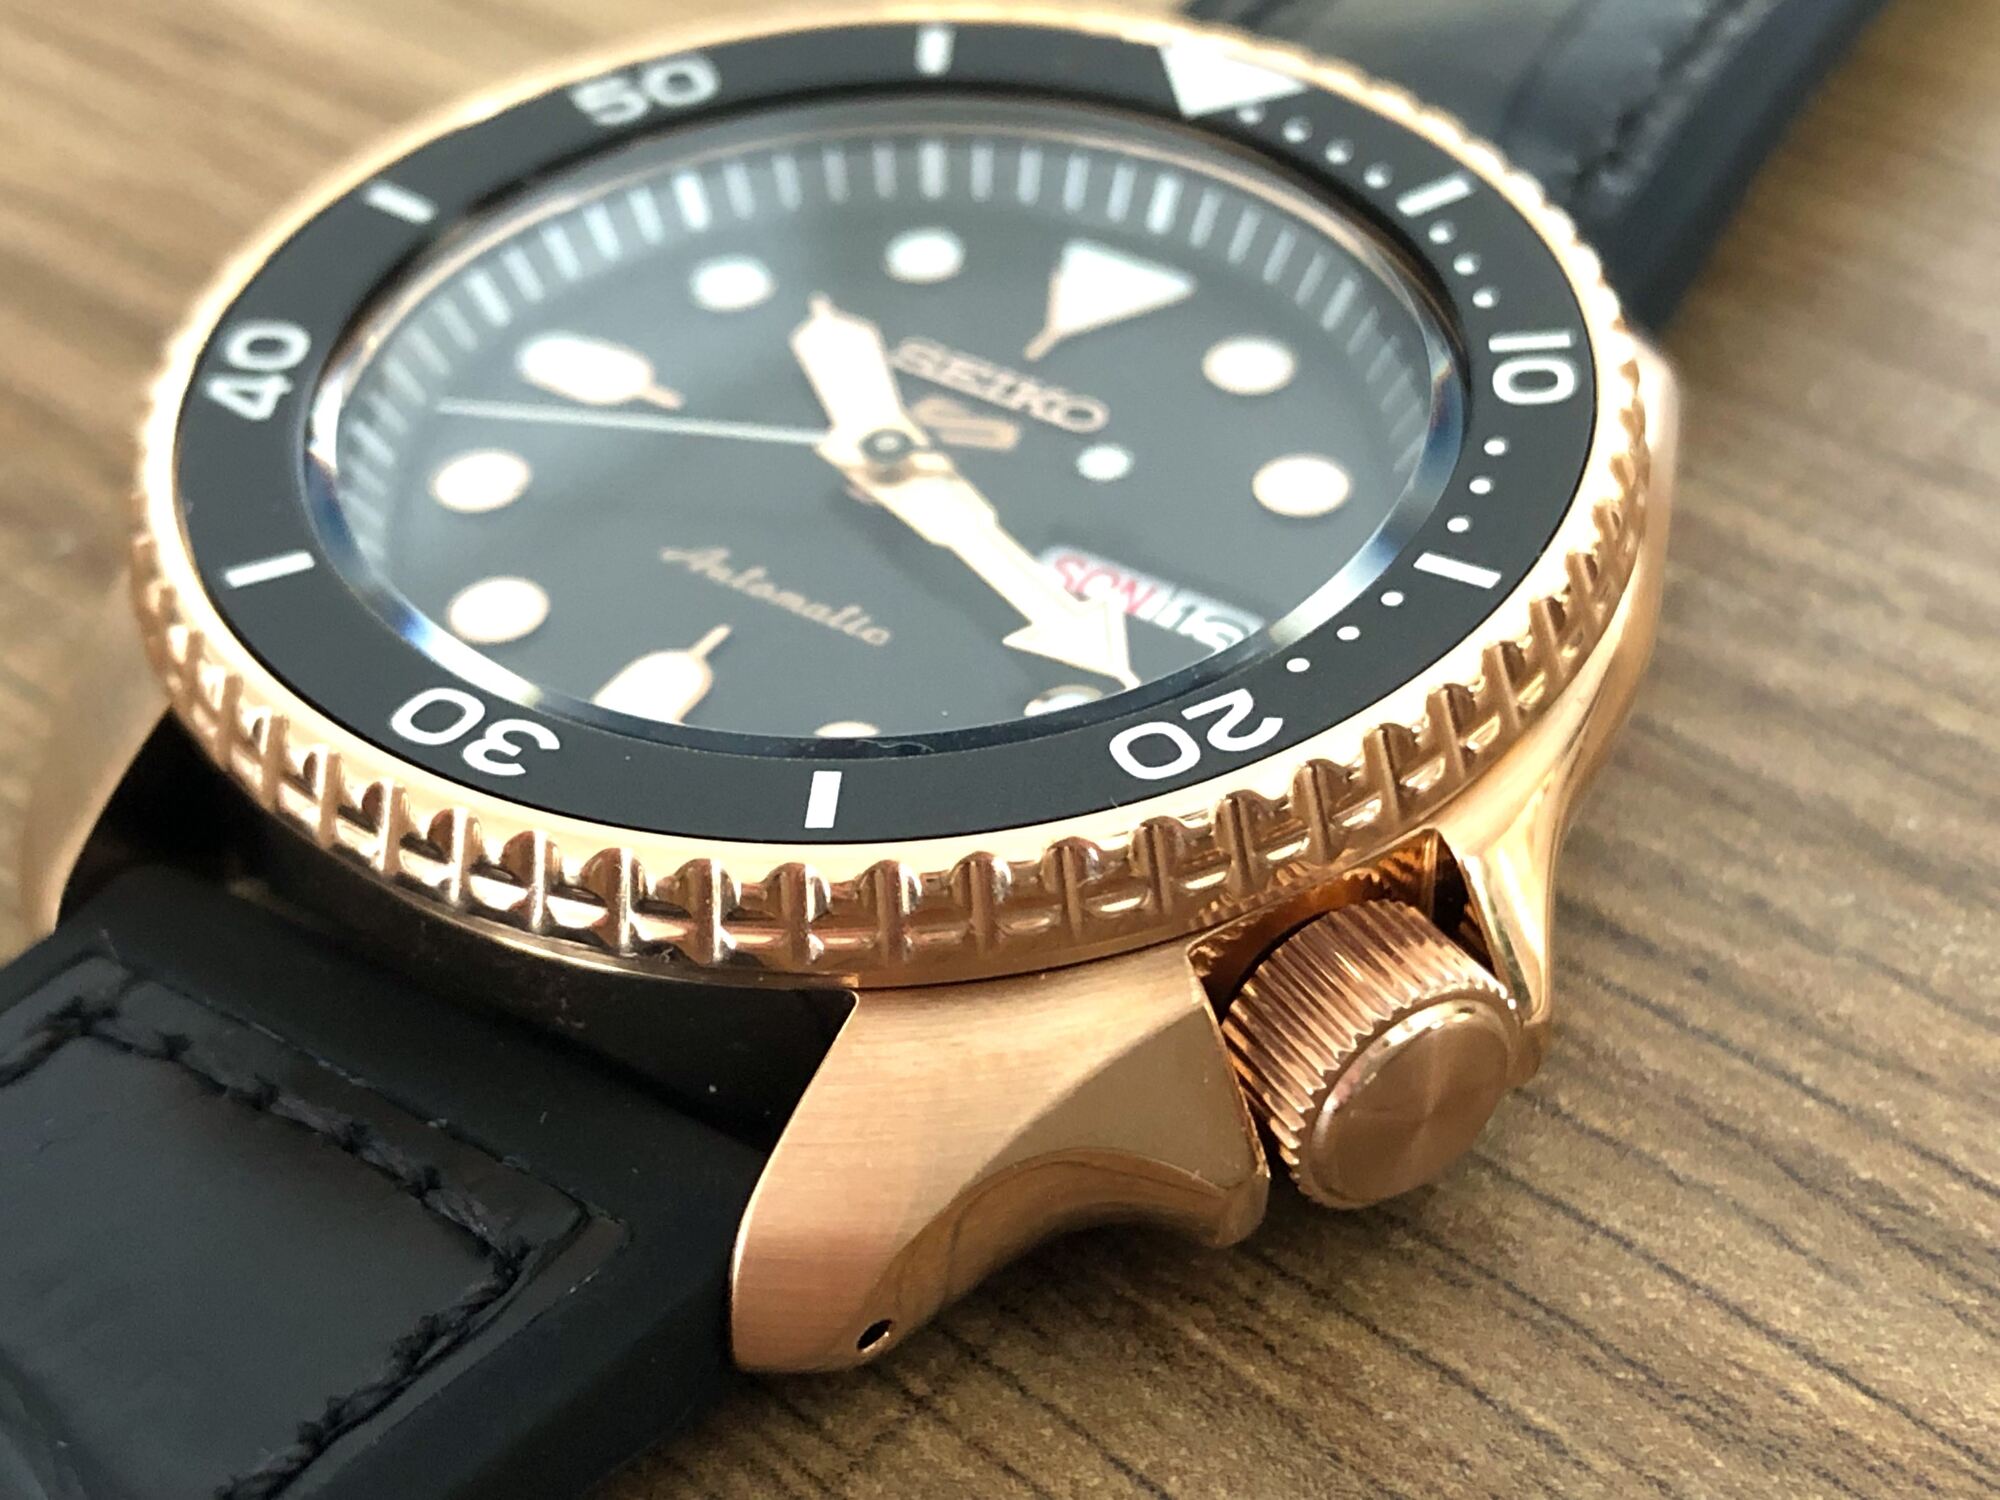 Rose-gold tone case with black dial and crown protectors